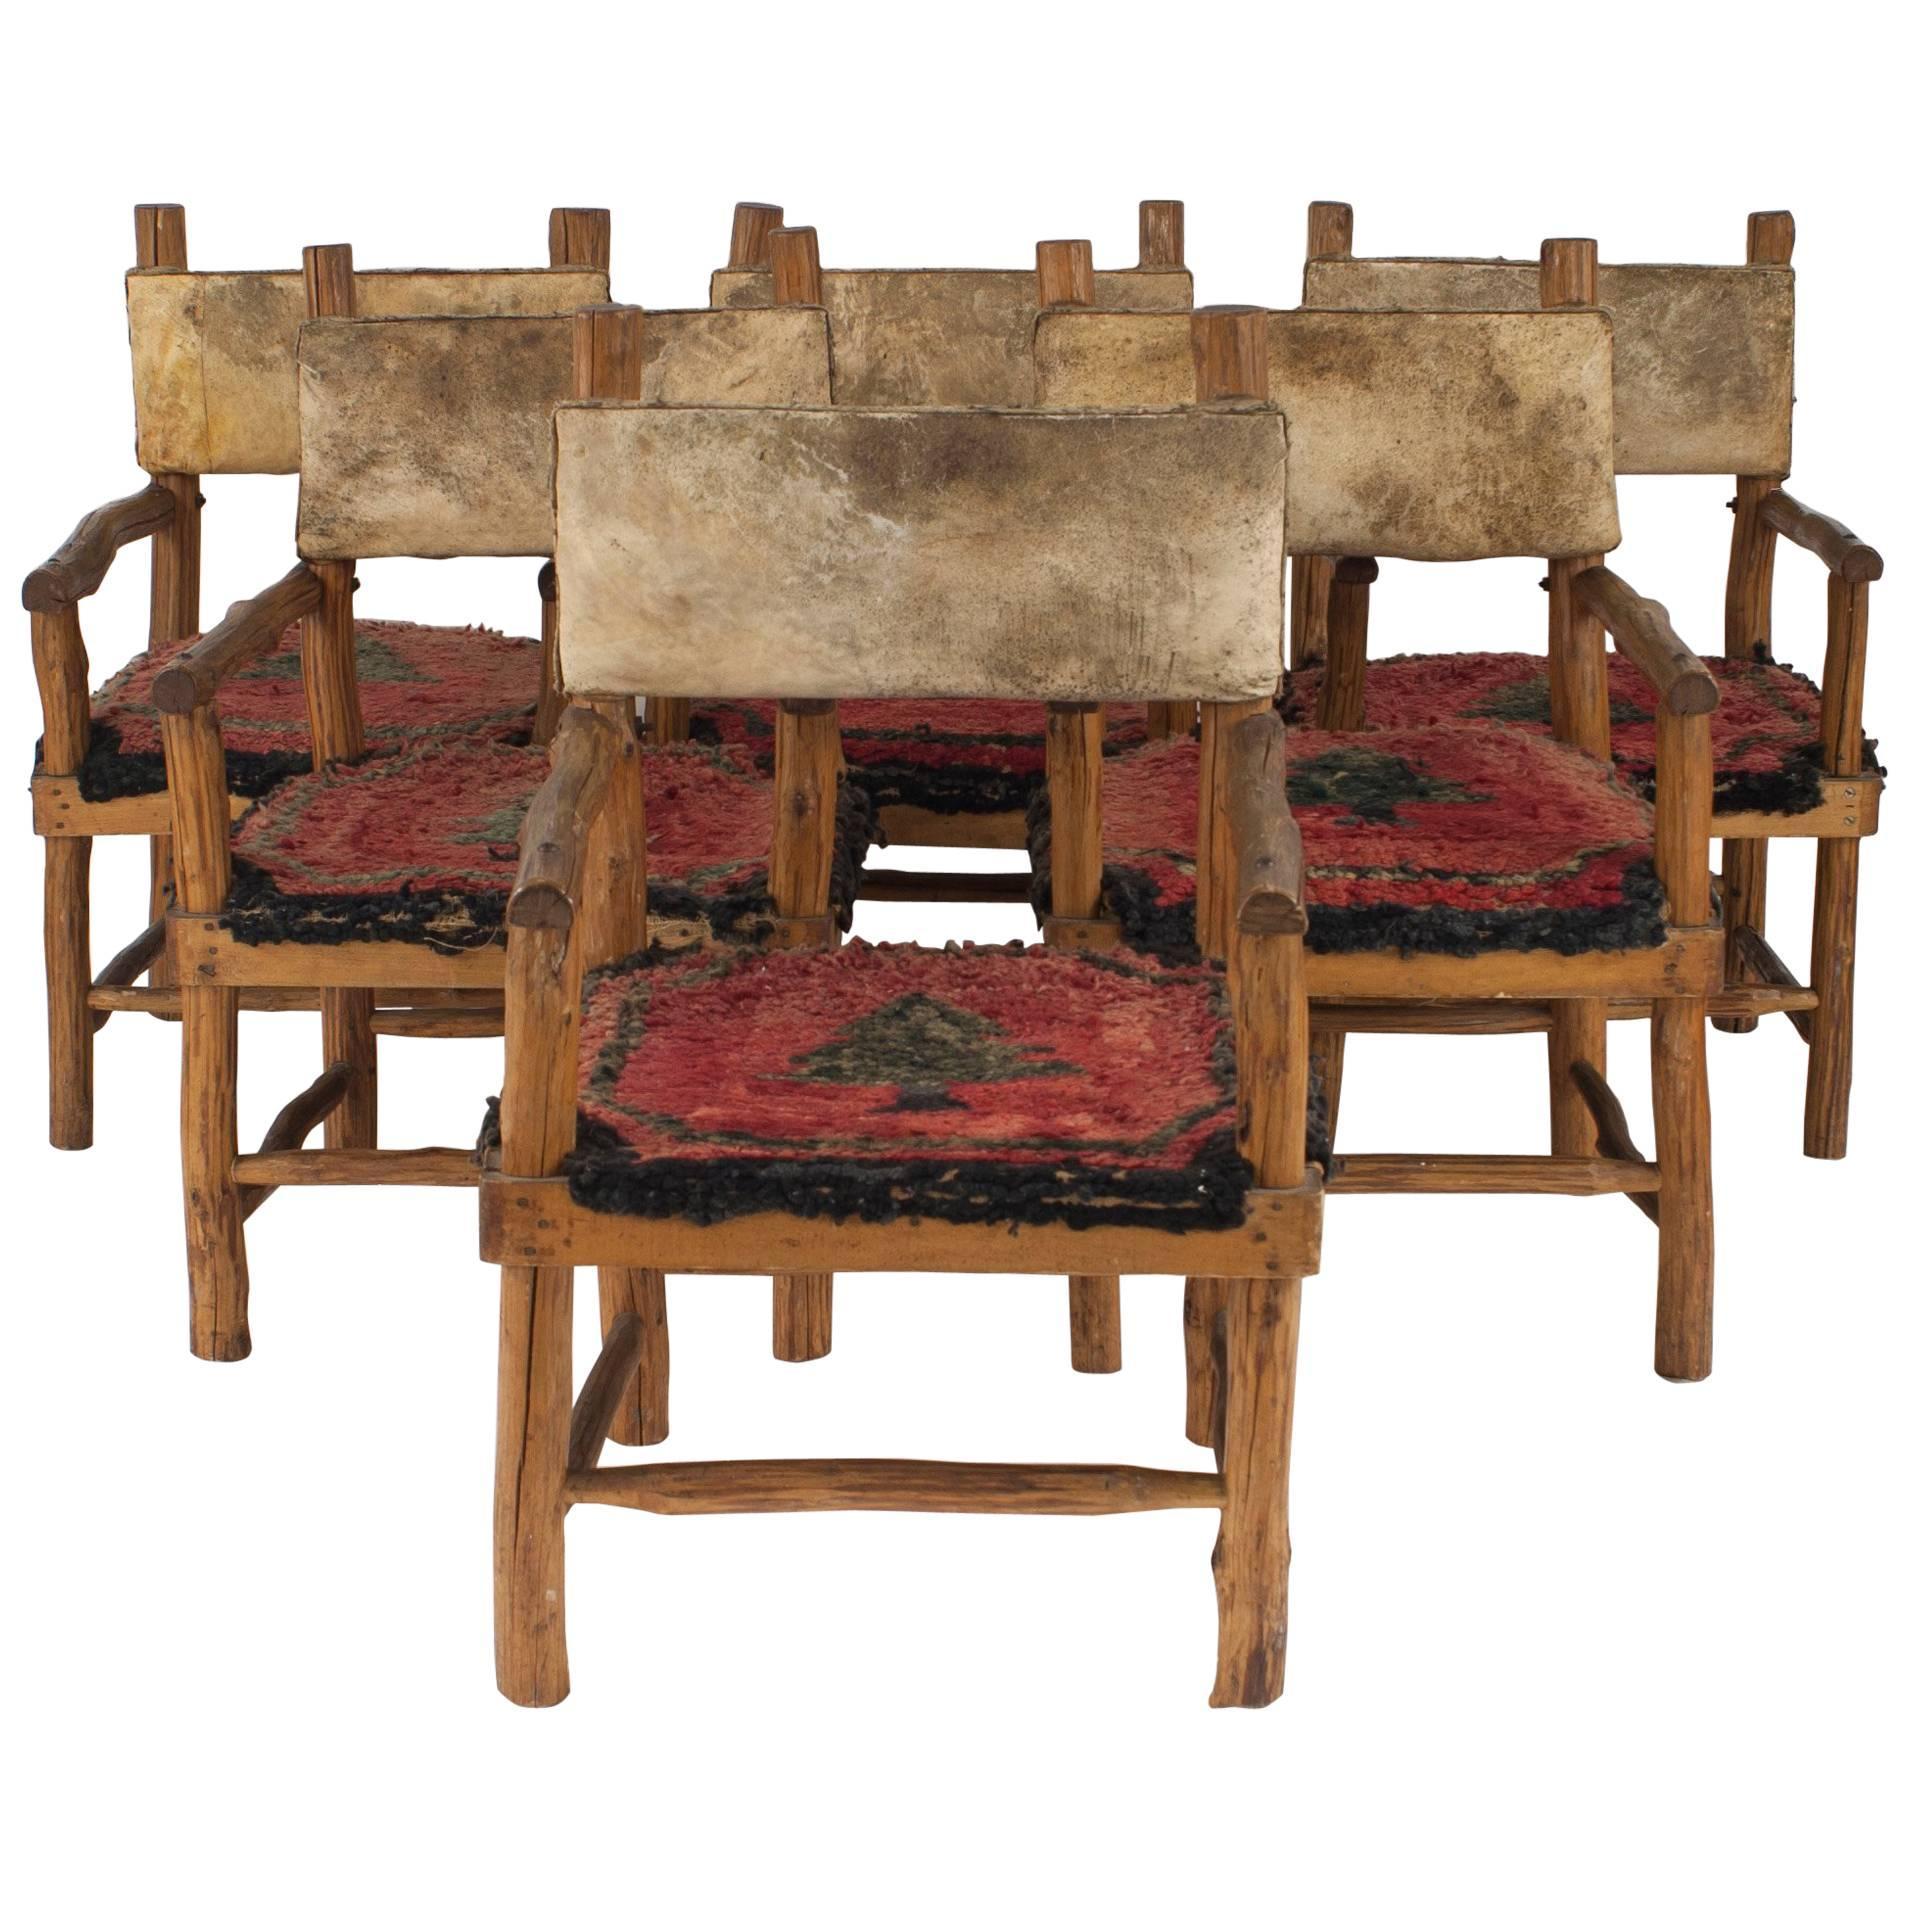 Set of 6 Rustic Adirondack Hooked Rug Arm Chairs